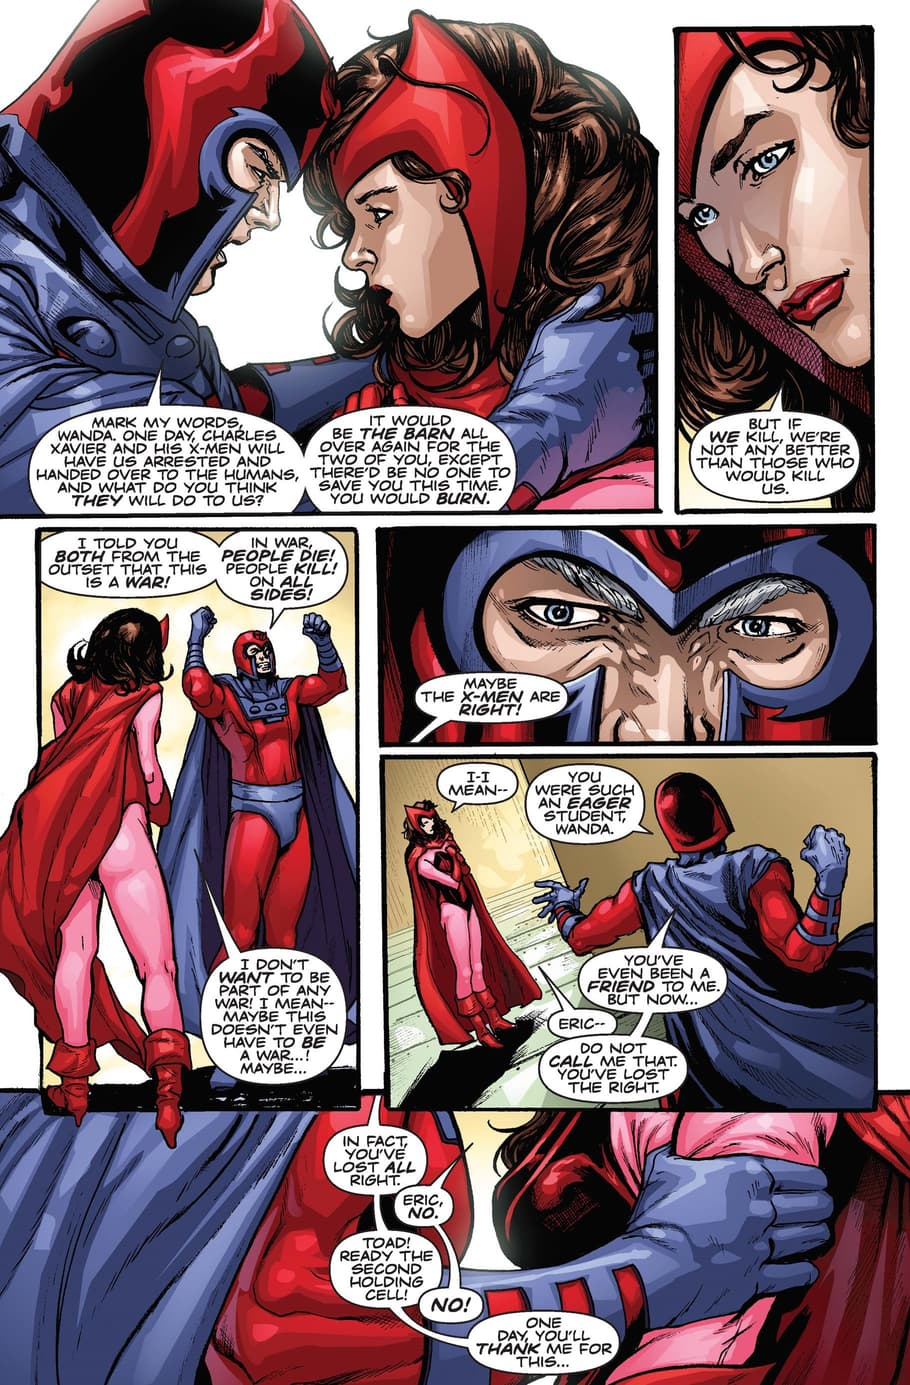 Wanda attempts to leave the Brotherhood but faces imprisonment from Magneto.